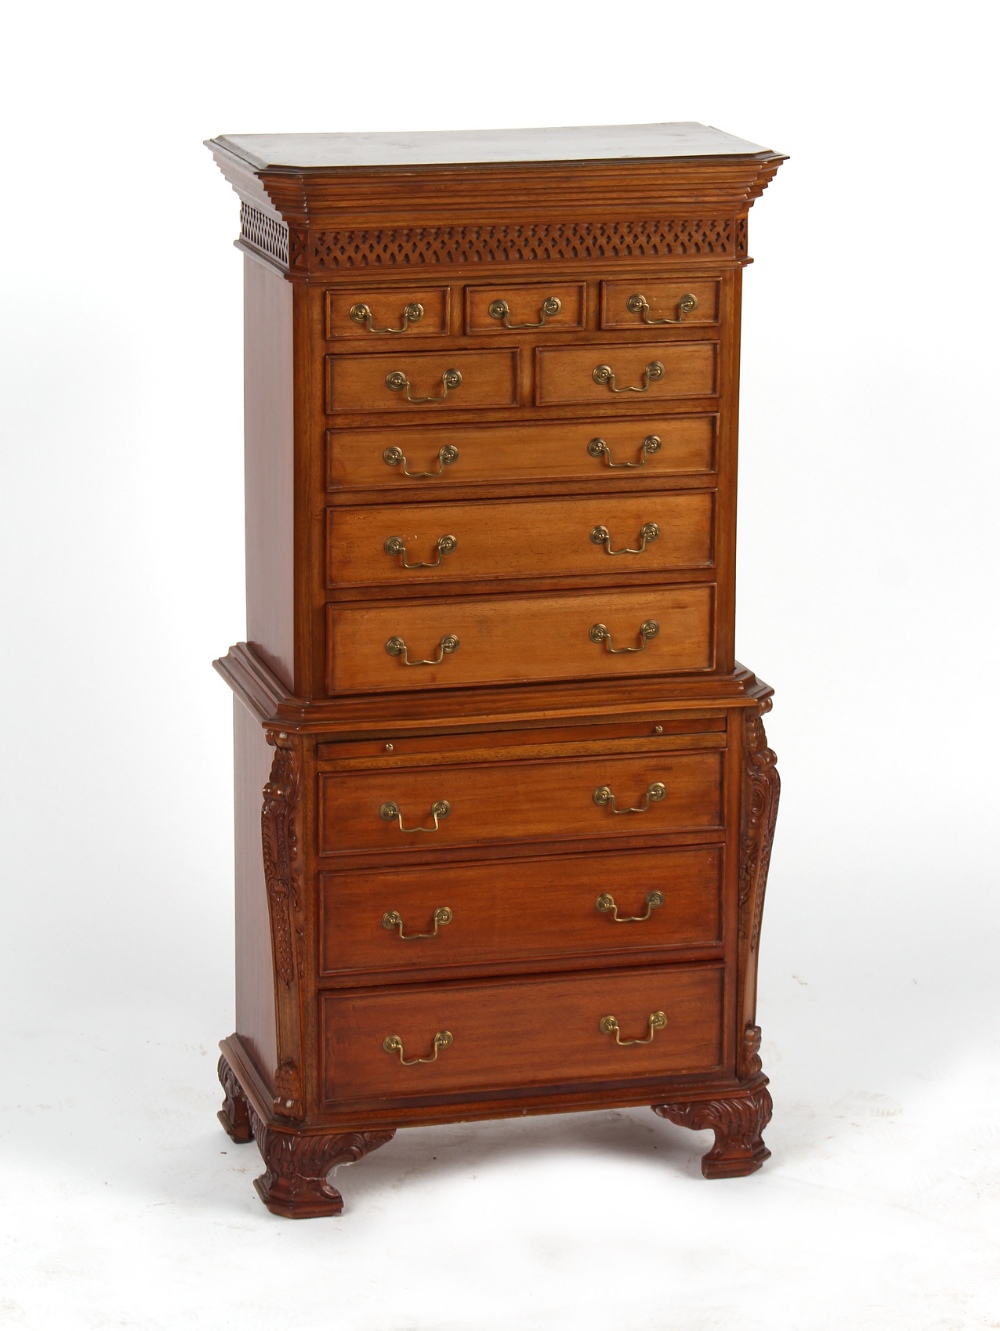 Property of a deceased estate - a modern reproduction miniature chest-on-chest or tallboy, 39ins. (